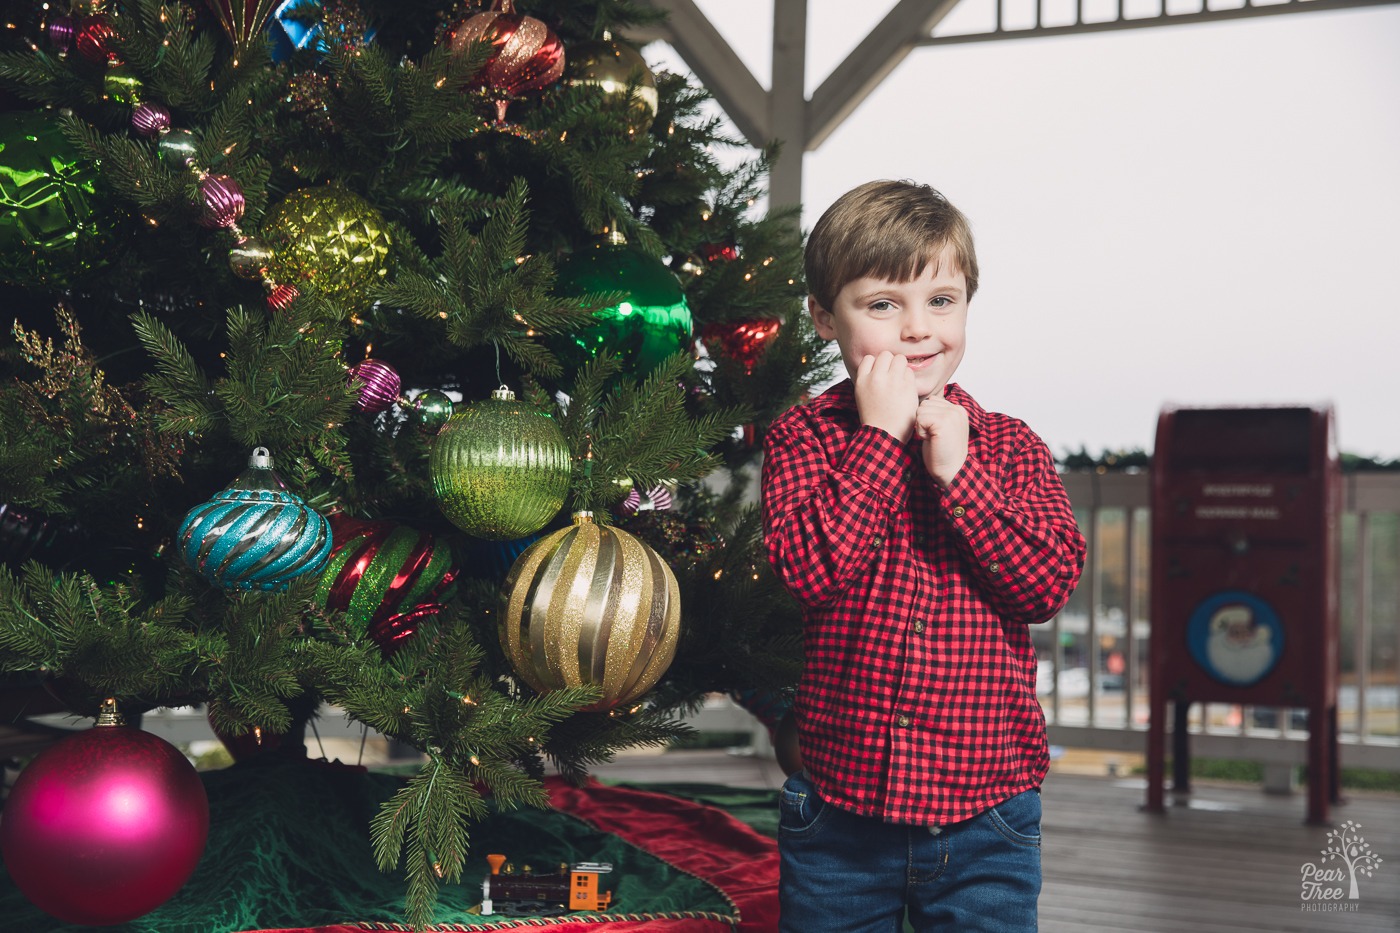 Four year old photoshoot of a boy in a red checked shirt standing next to a large Christmas tree and smiling in the downtown Woodstock gazebo